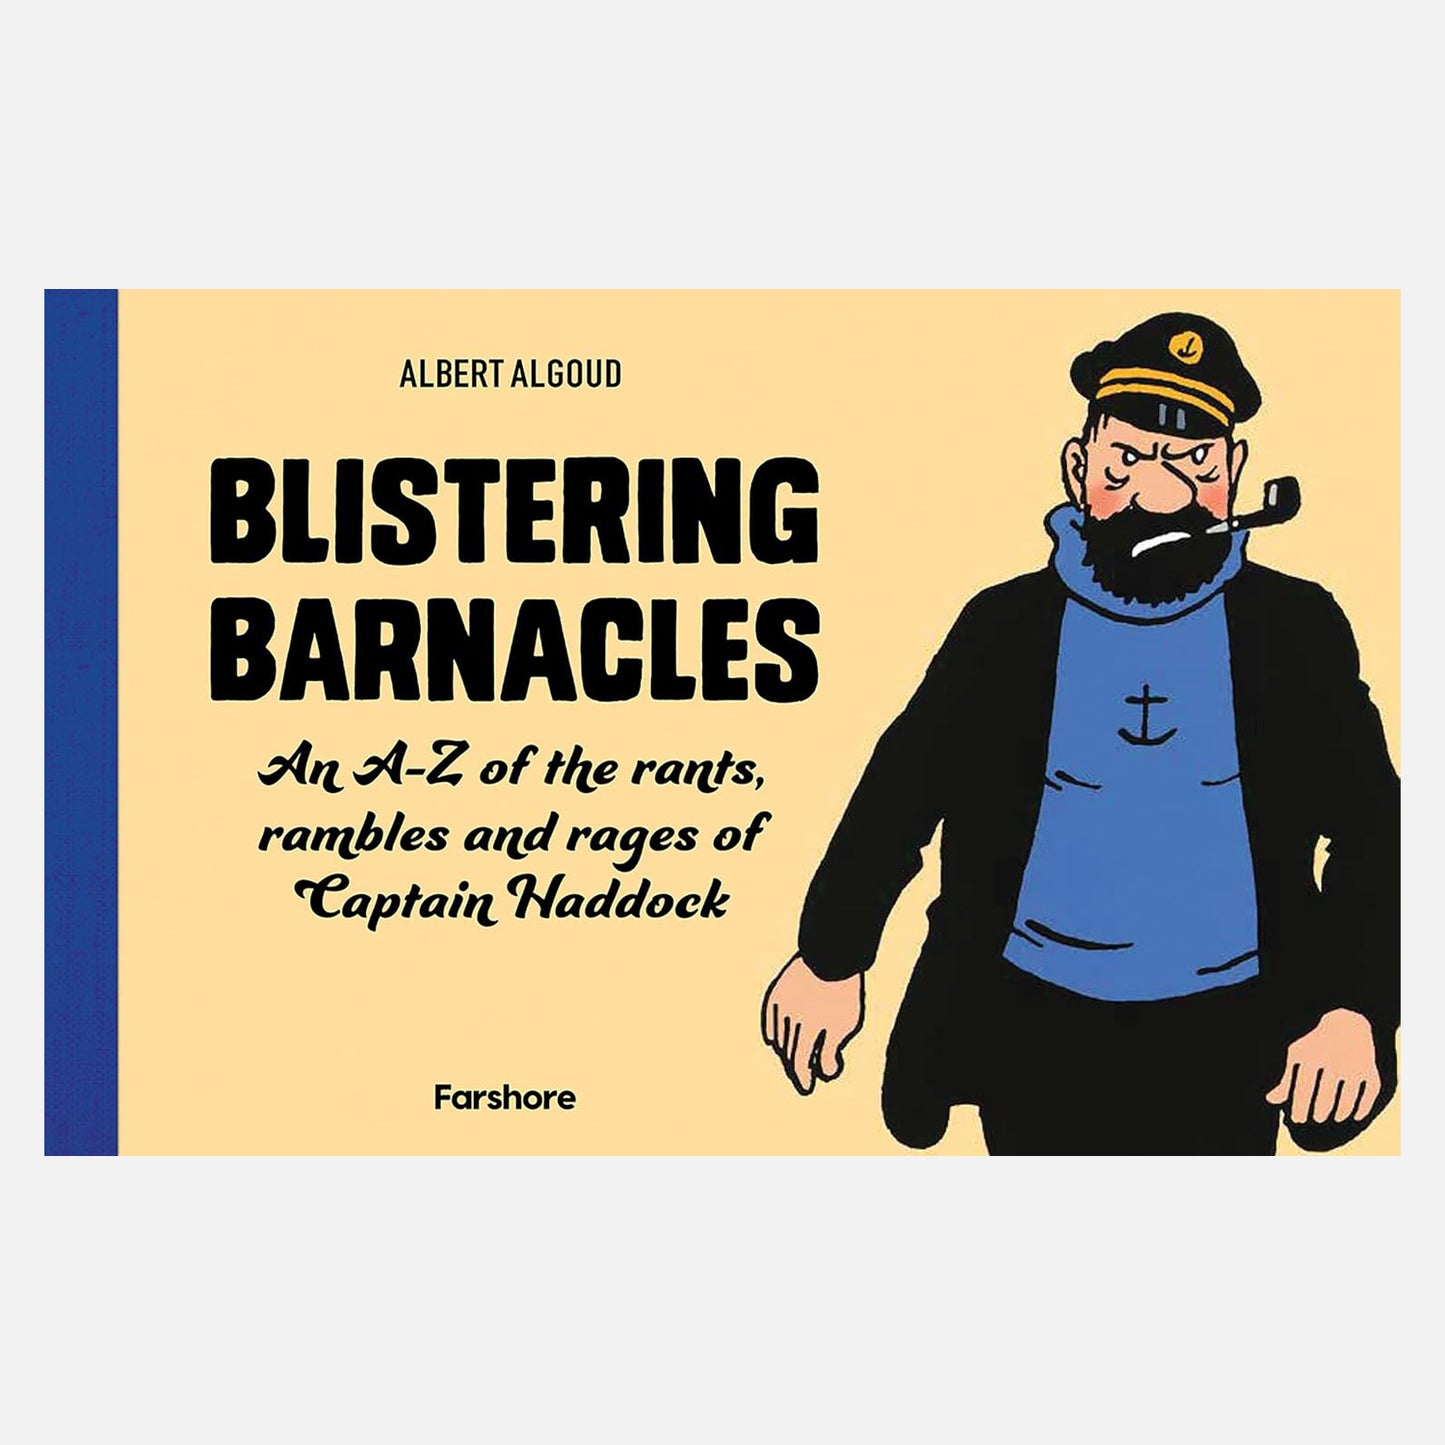 Blistering Barnacles: An A-Z of The Rants, Rambles and Rages of Captain Haddock. Cover shows Captian Haddock smoking a pipe  and looking grumpy